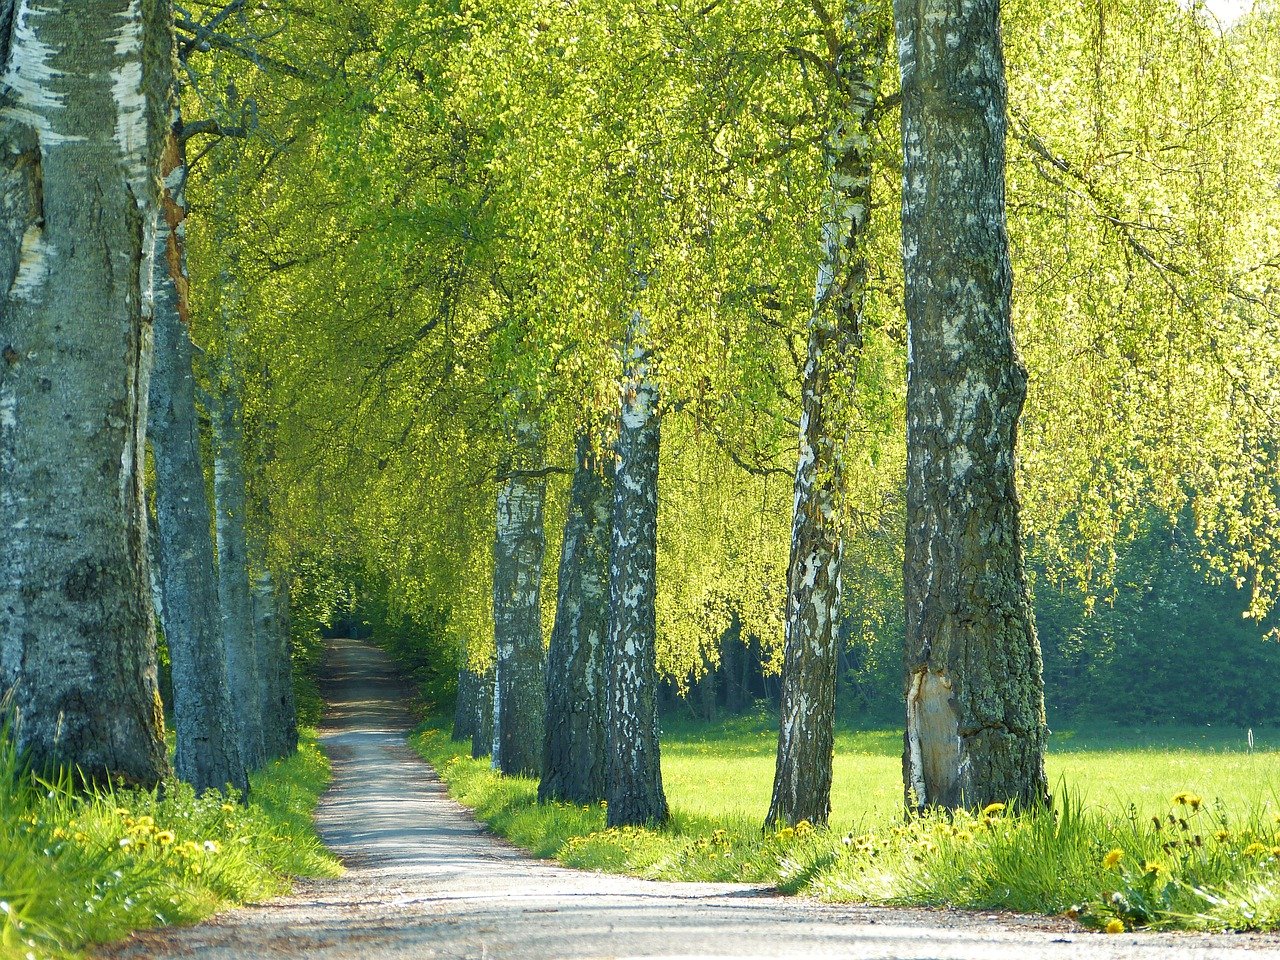 Image of a road with tall trees on either side and the light from the sun dappling through the leaves.